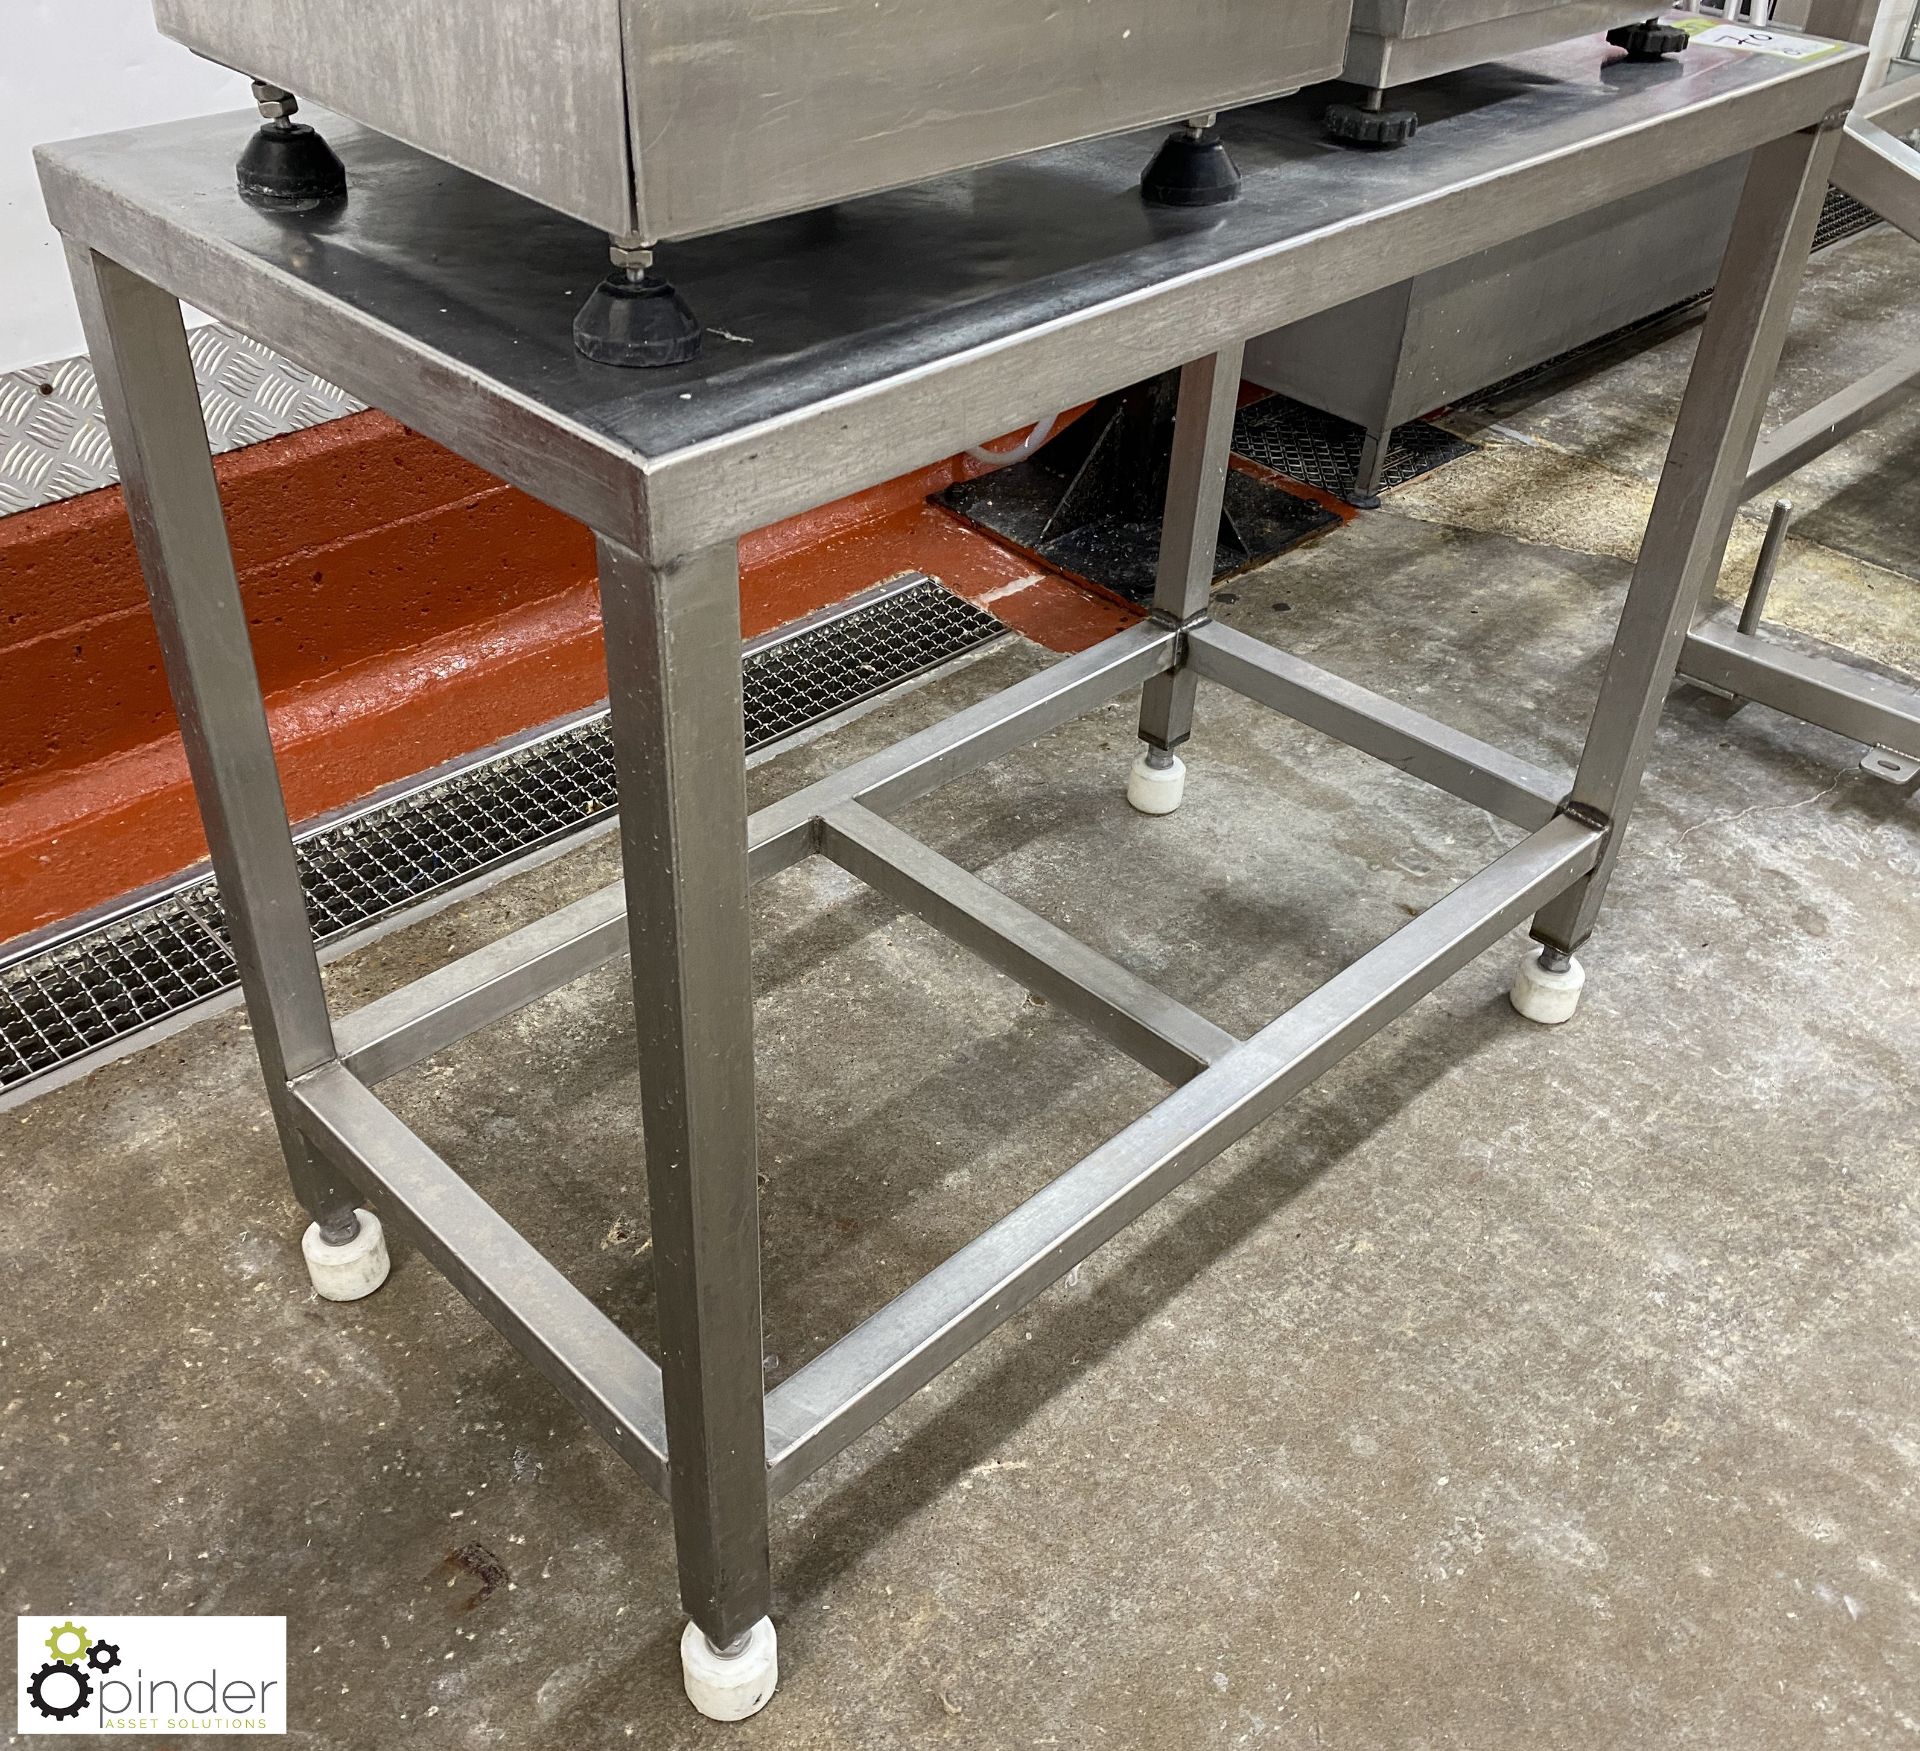 Stainless steel Preparation Table, 1000mm x 500mm x 830mm (Lift Out Fee: £10 plus VAT) - Image 2 of 3